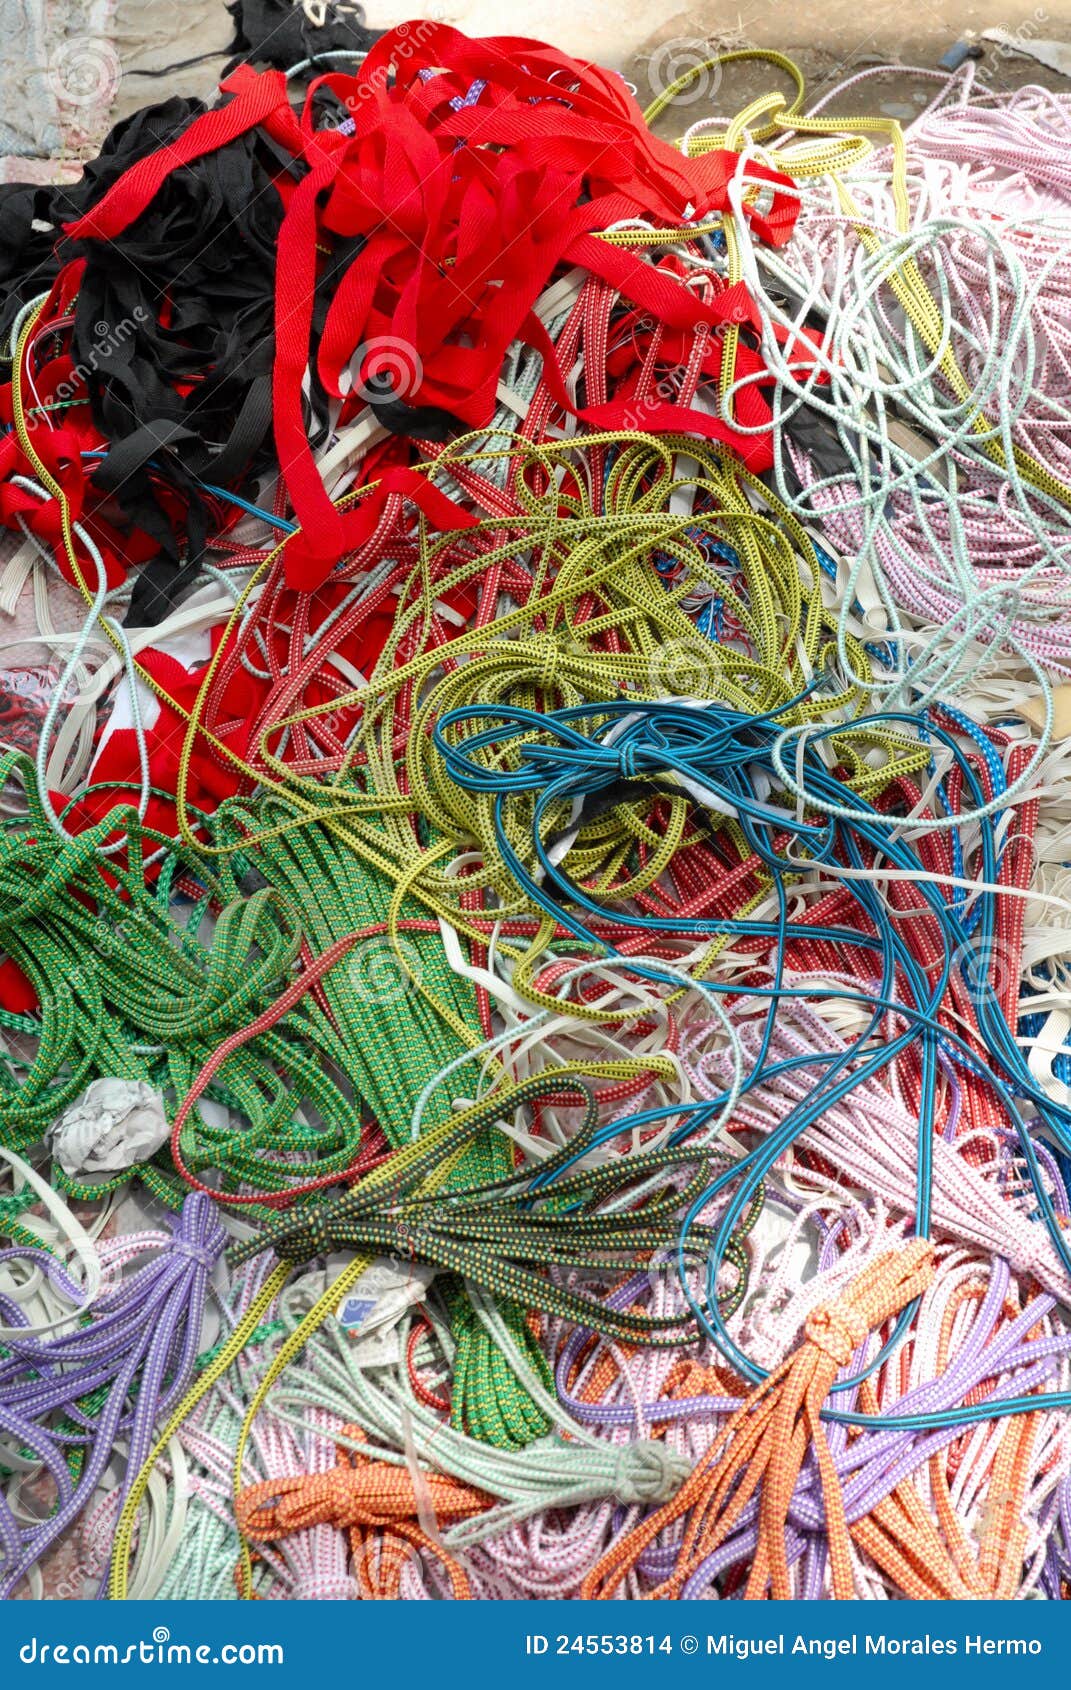 Entanglement Stock Images - Image: 24553814